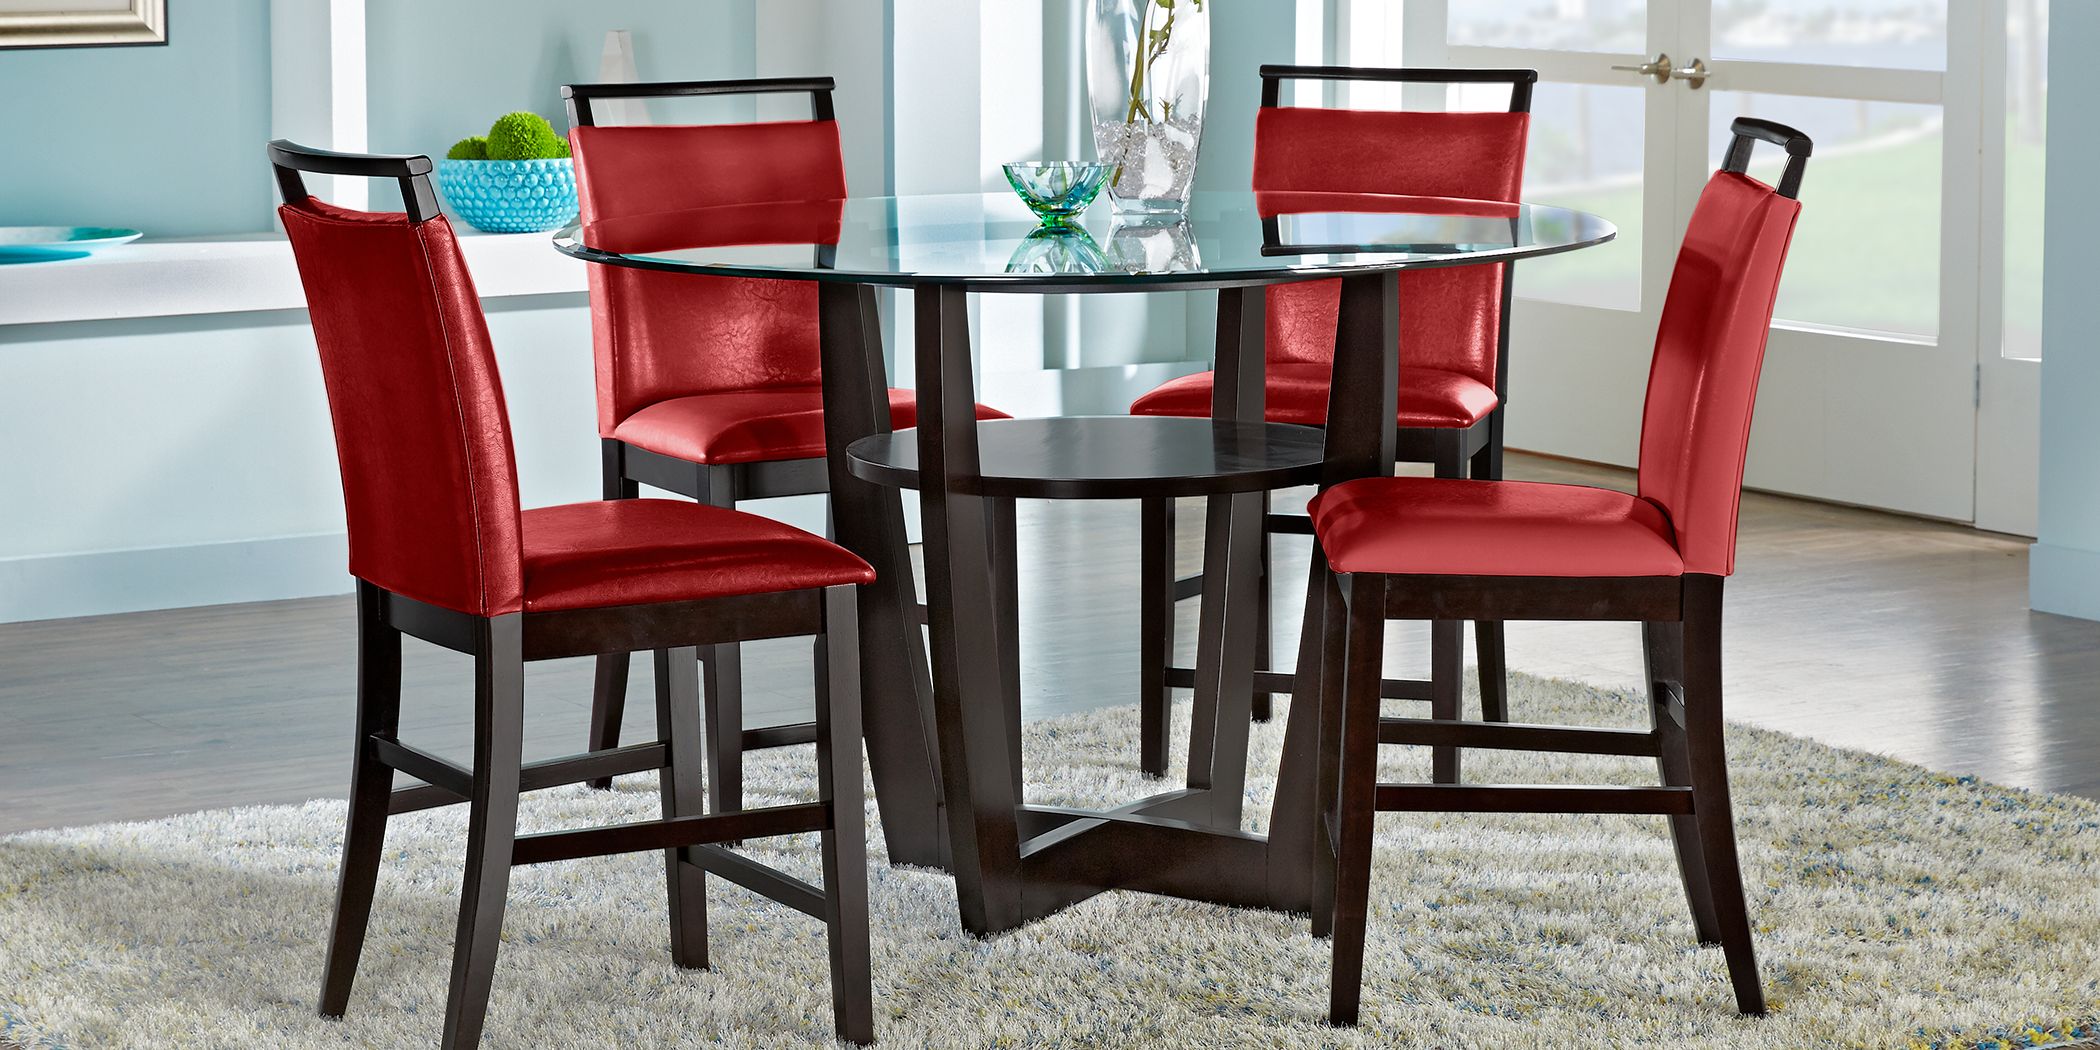 Glass Top Dining Room Table Sets For, High Top Dining Room Table And Chairs